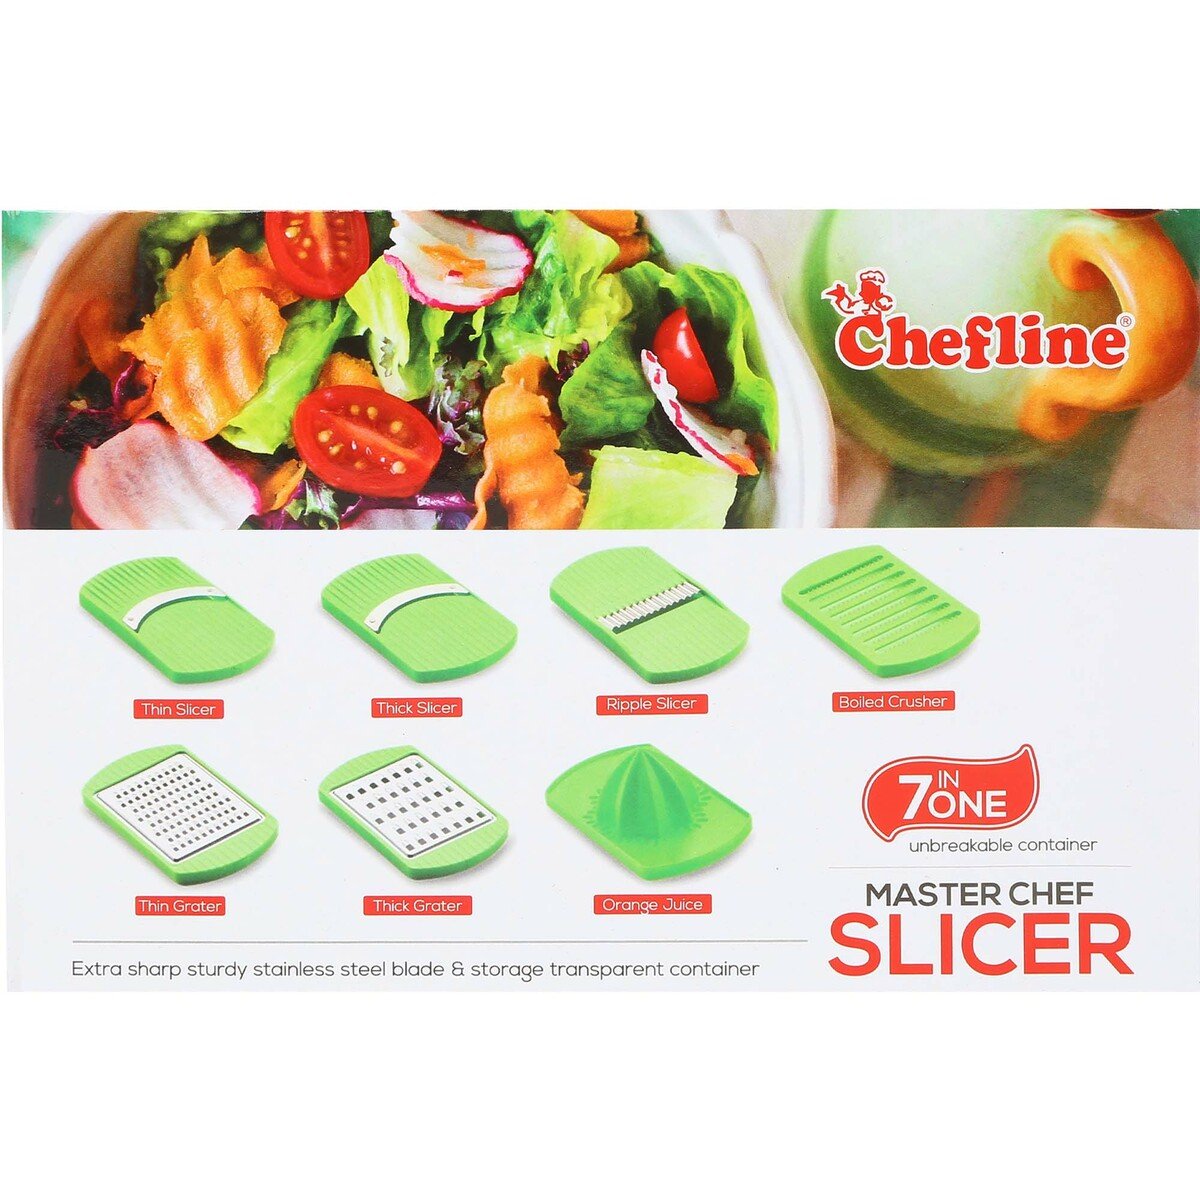 Chefline Slicer With Container 7 in 1